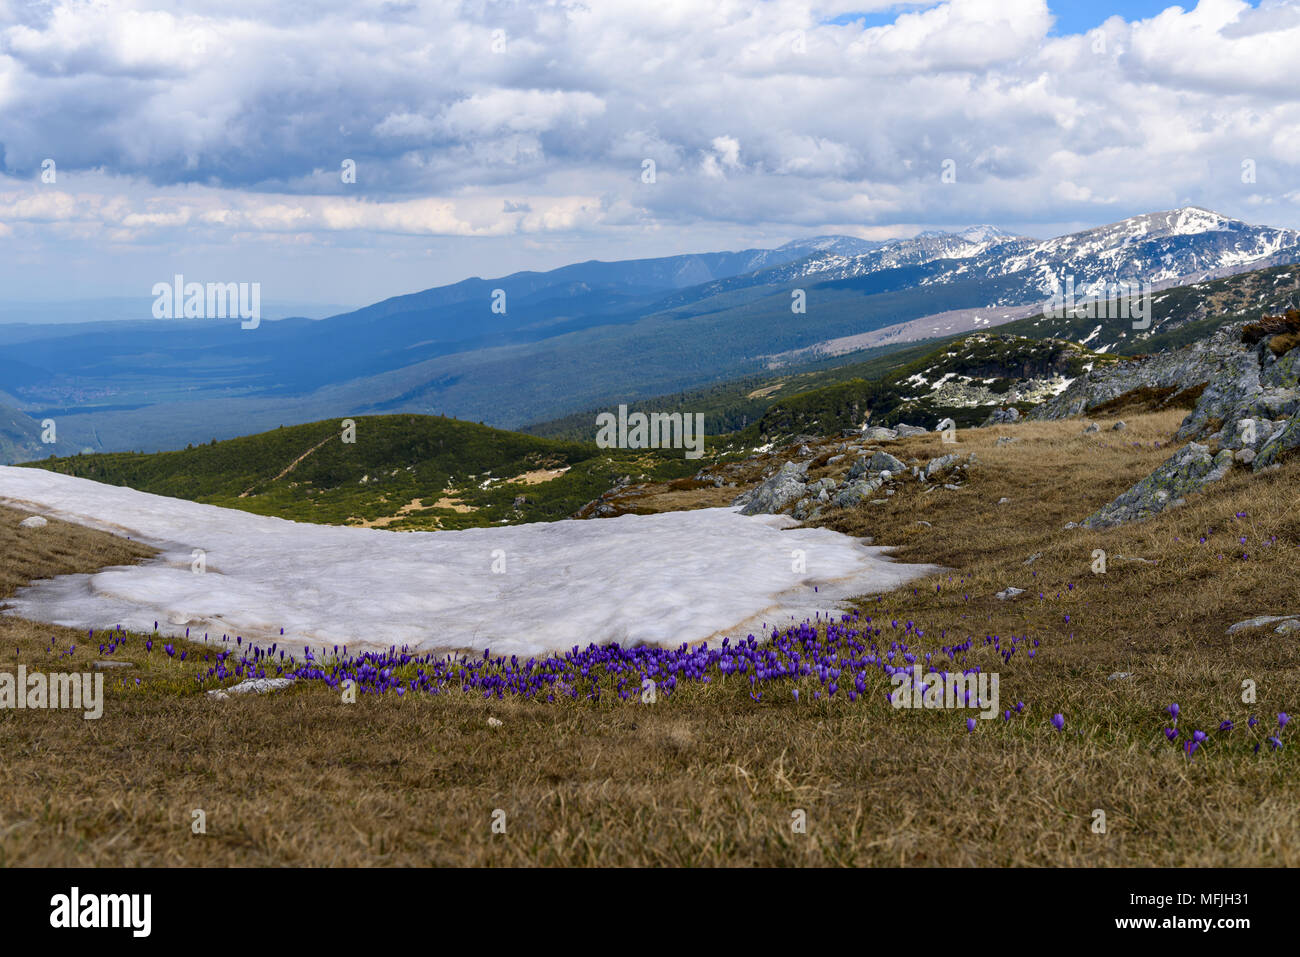 Blooming violet crocus wildflowers in mountains with remains of snow behind them, Rila national park, Bulgaria Stock Photo